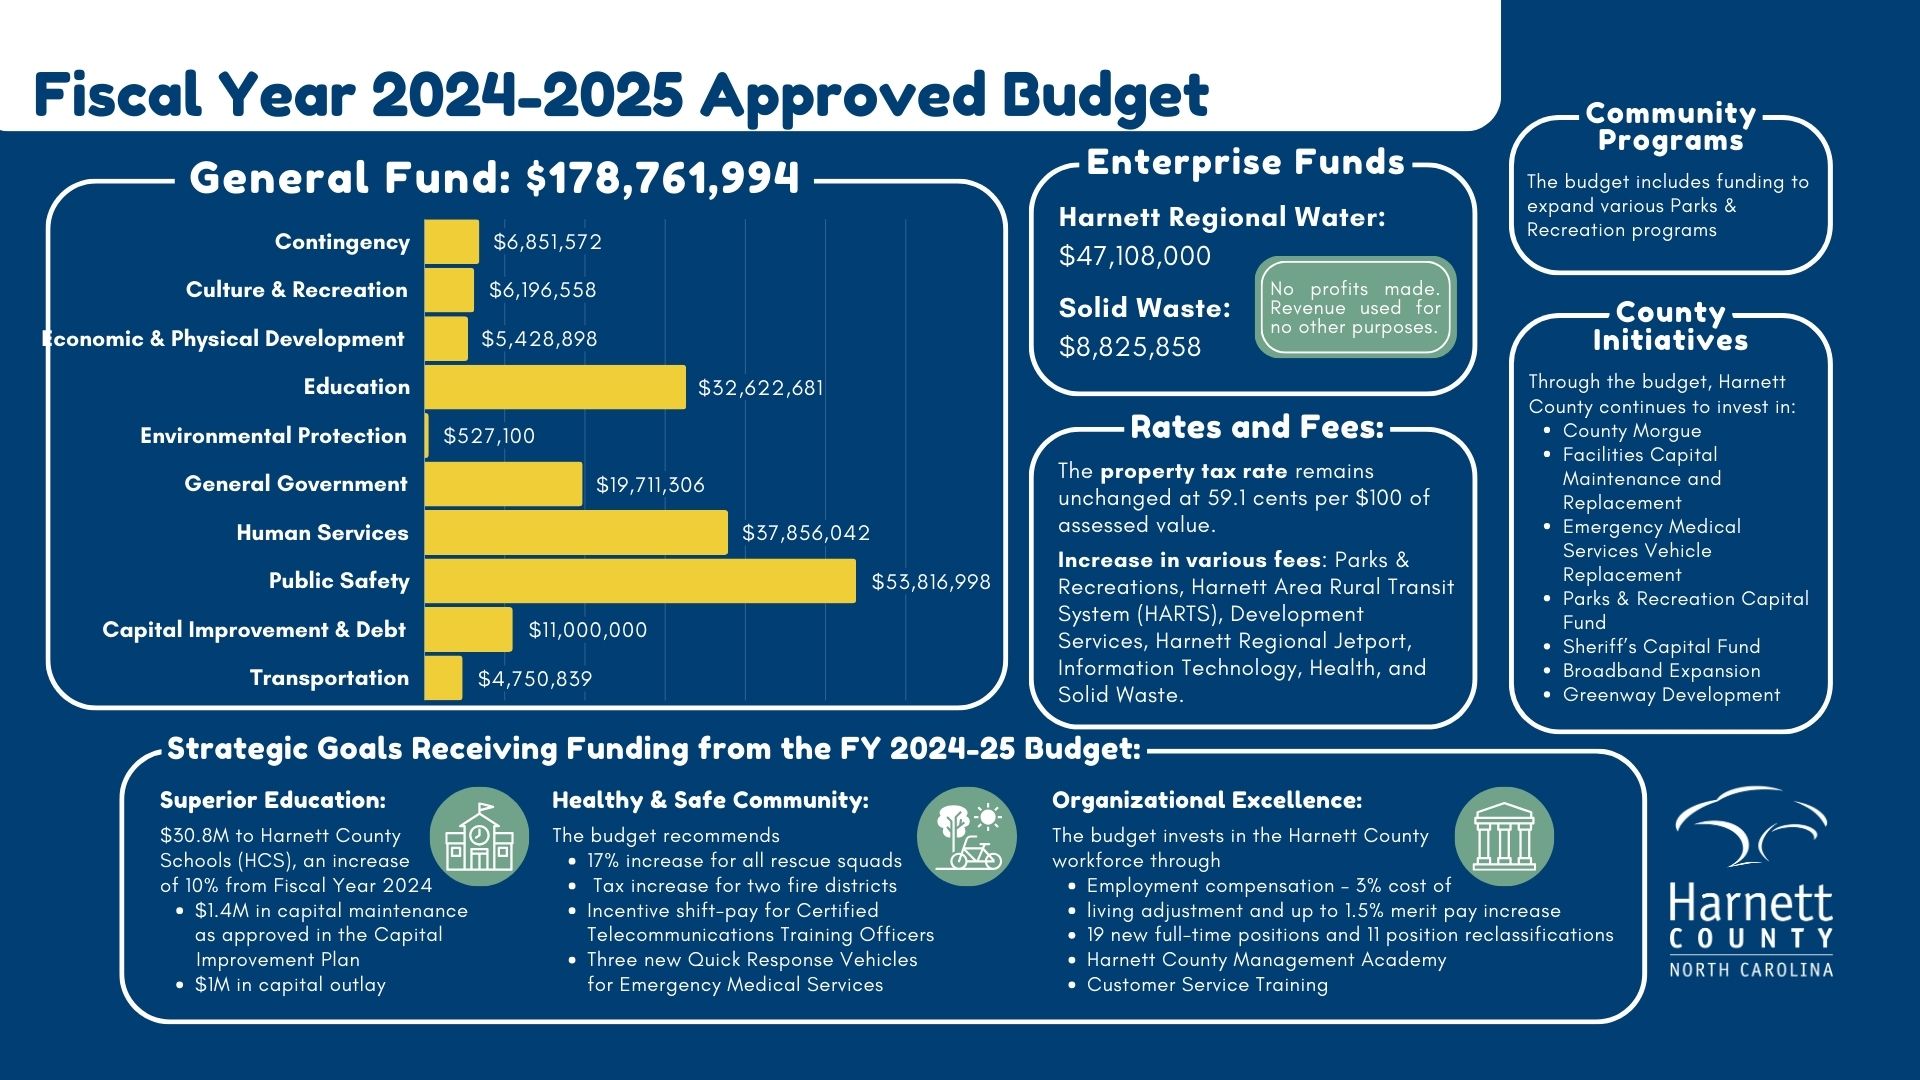 Fiscal Year 2024-2025 Approved Budget at a Glance 